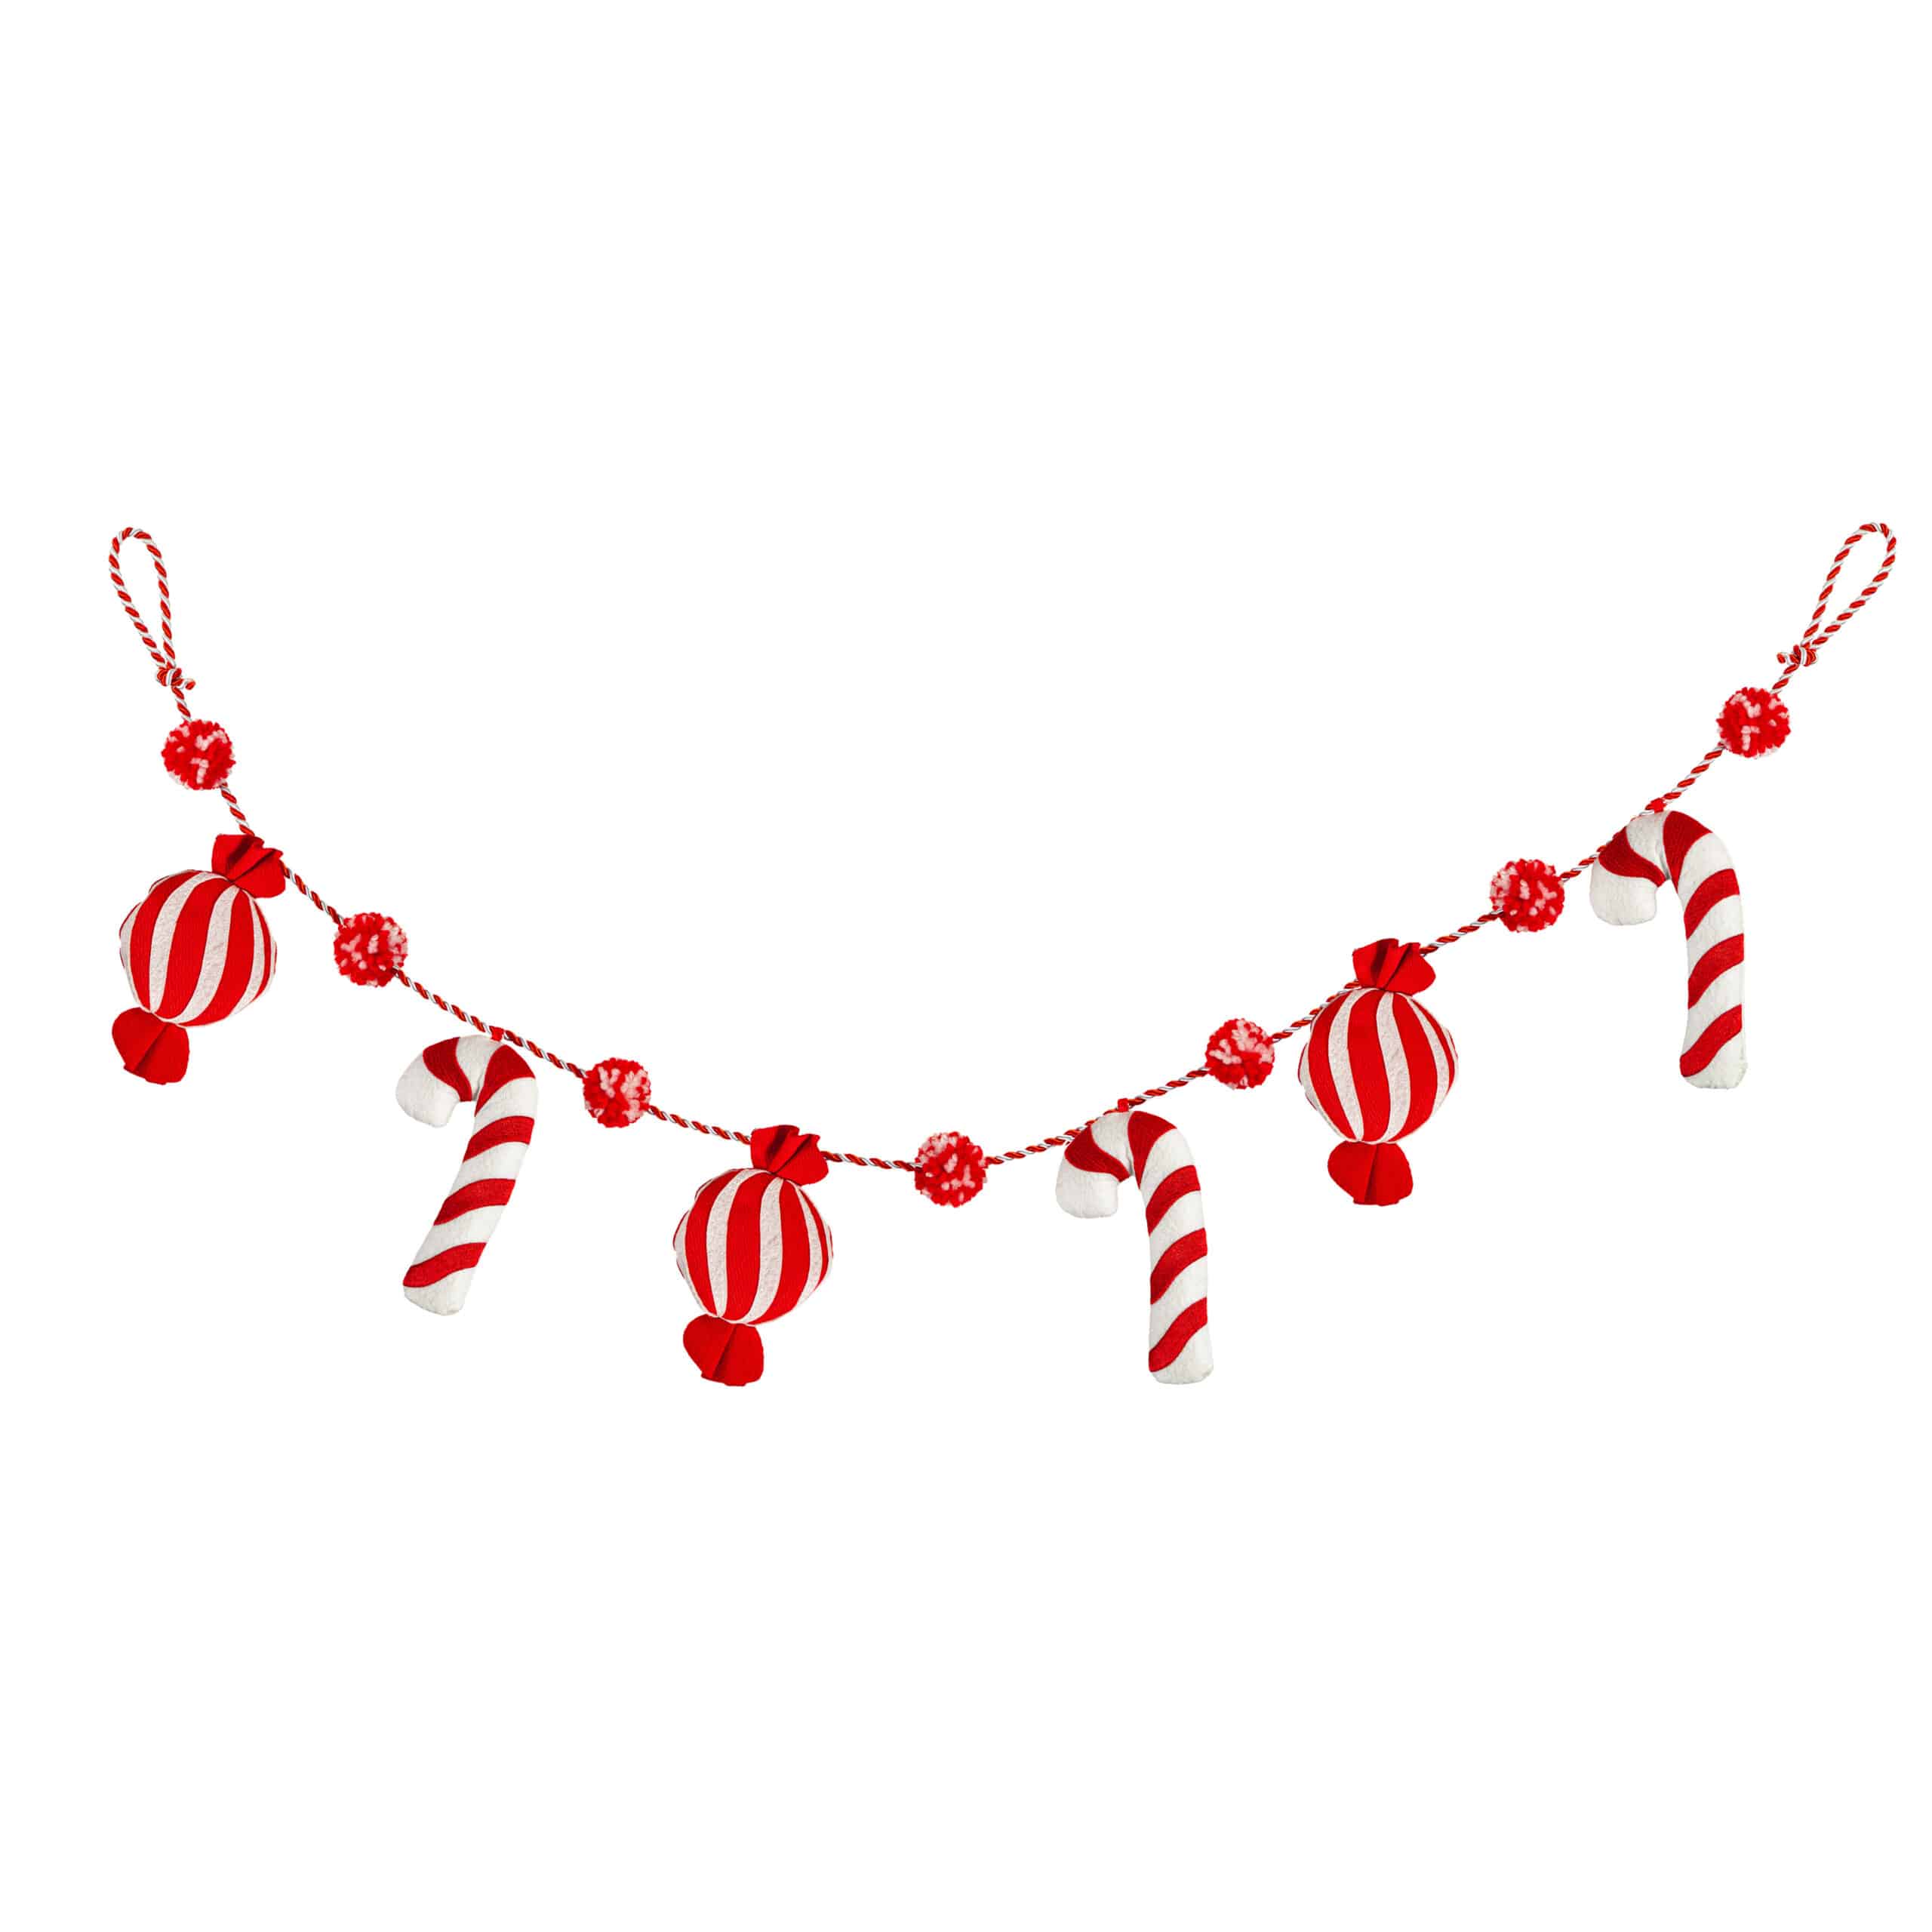 Fabric Candy Cane and Peppermint Garland image